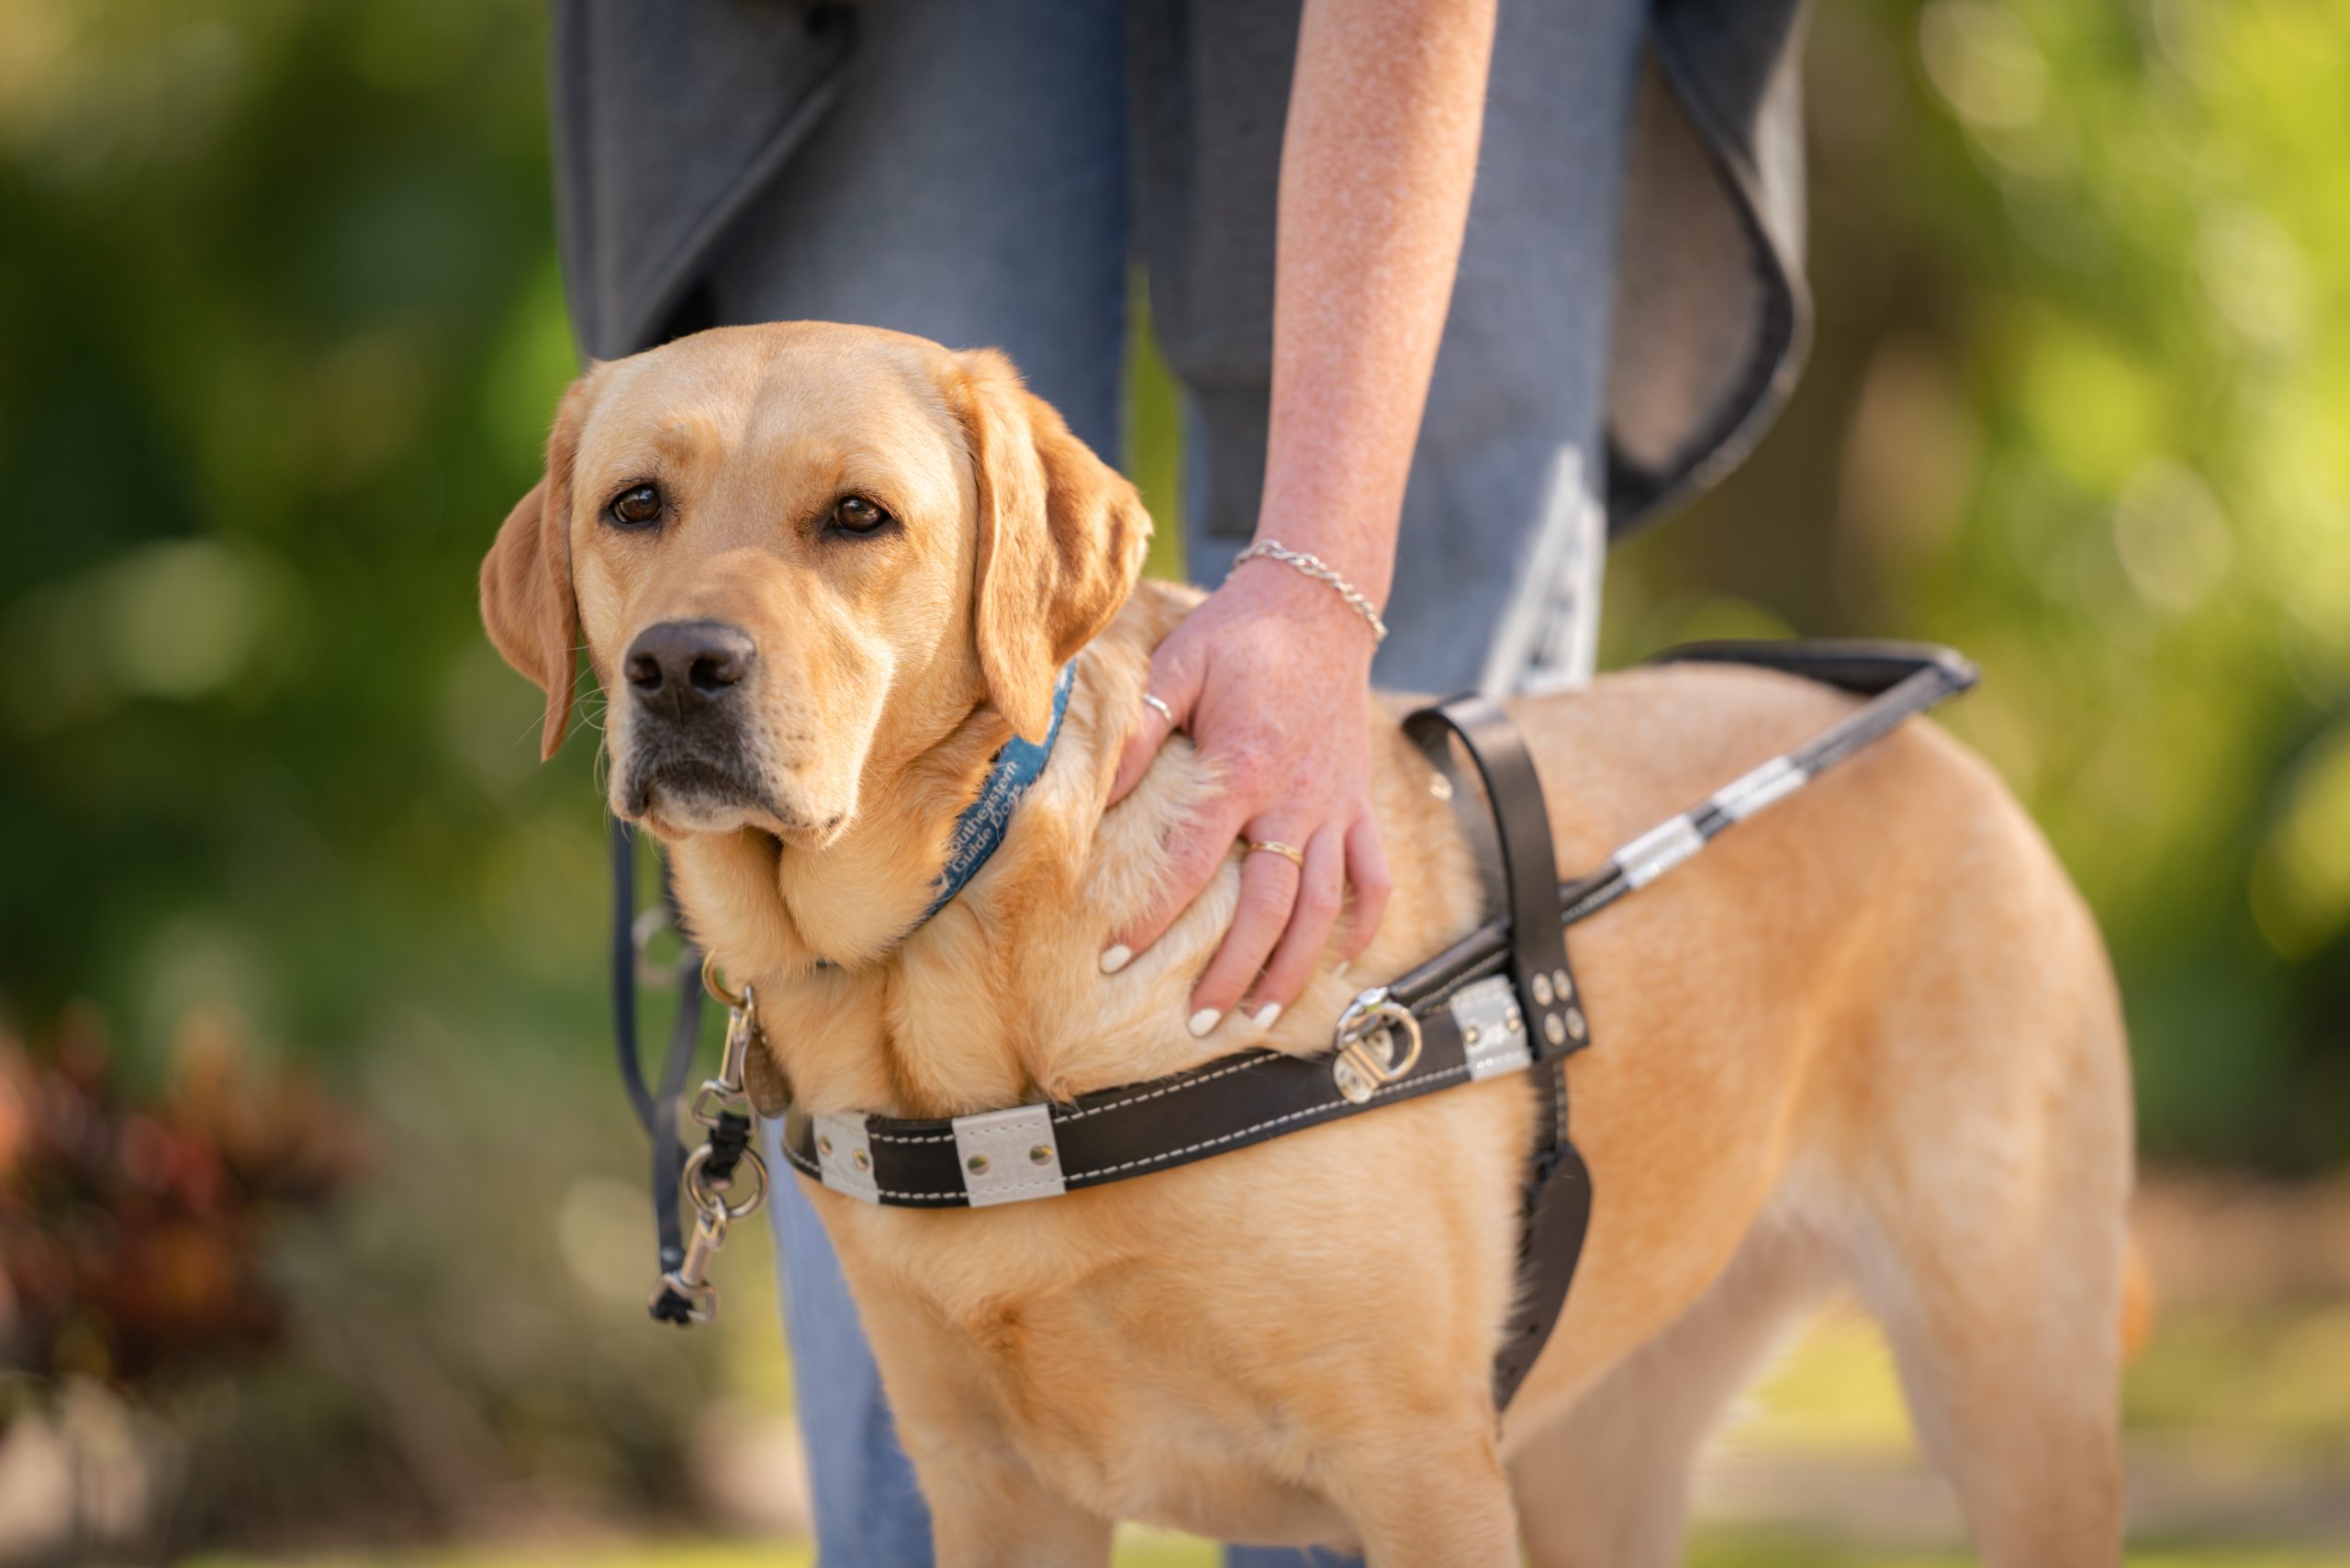 Yellow guide dog in harness stand with its handlers hand on its shoulder